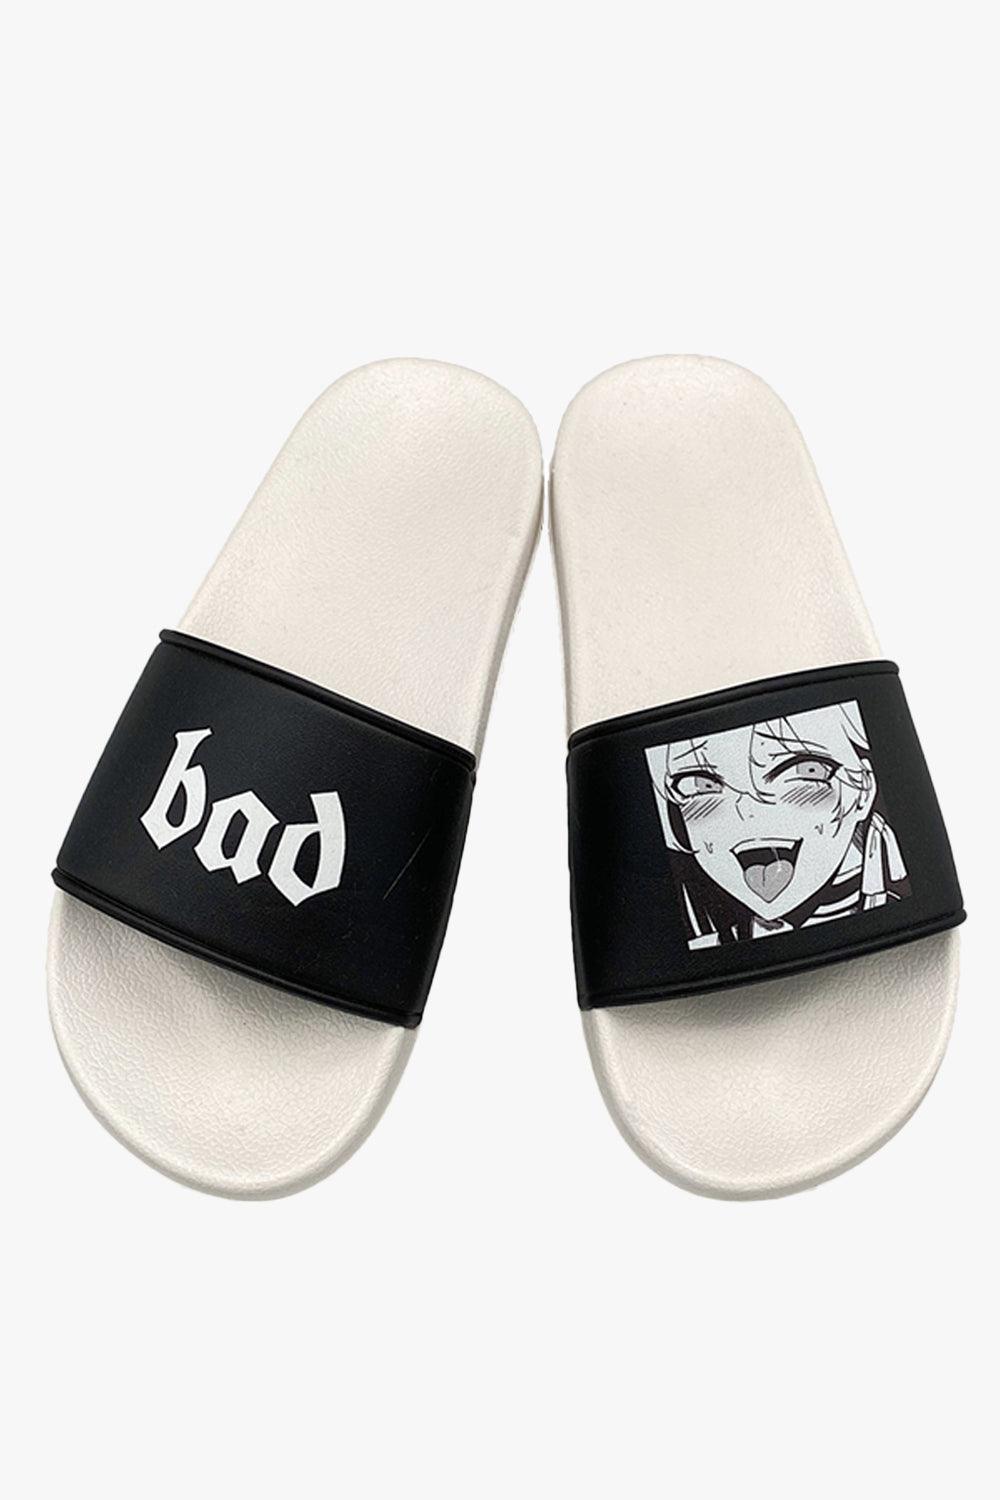 Bad Girl Slides Anime Aesthetic - Aesthetic Clothes Shop